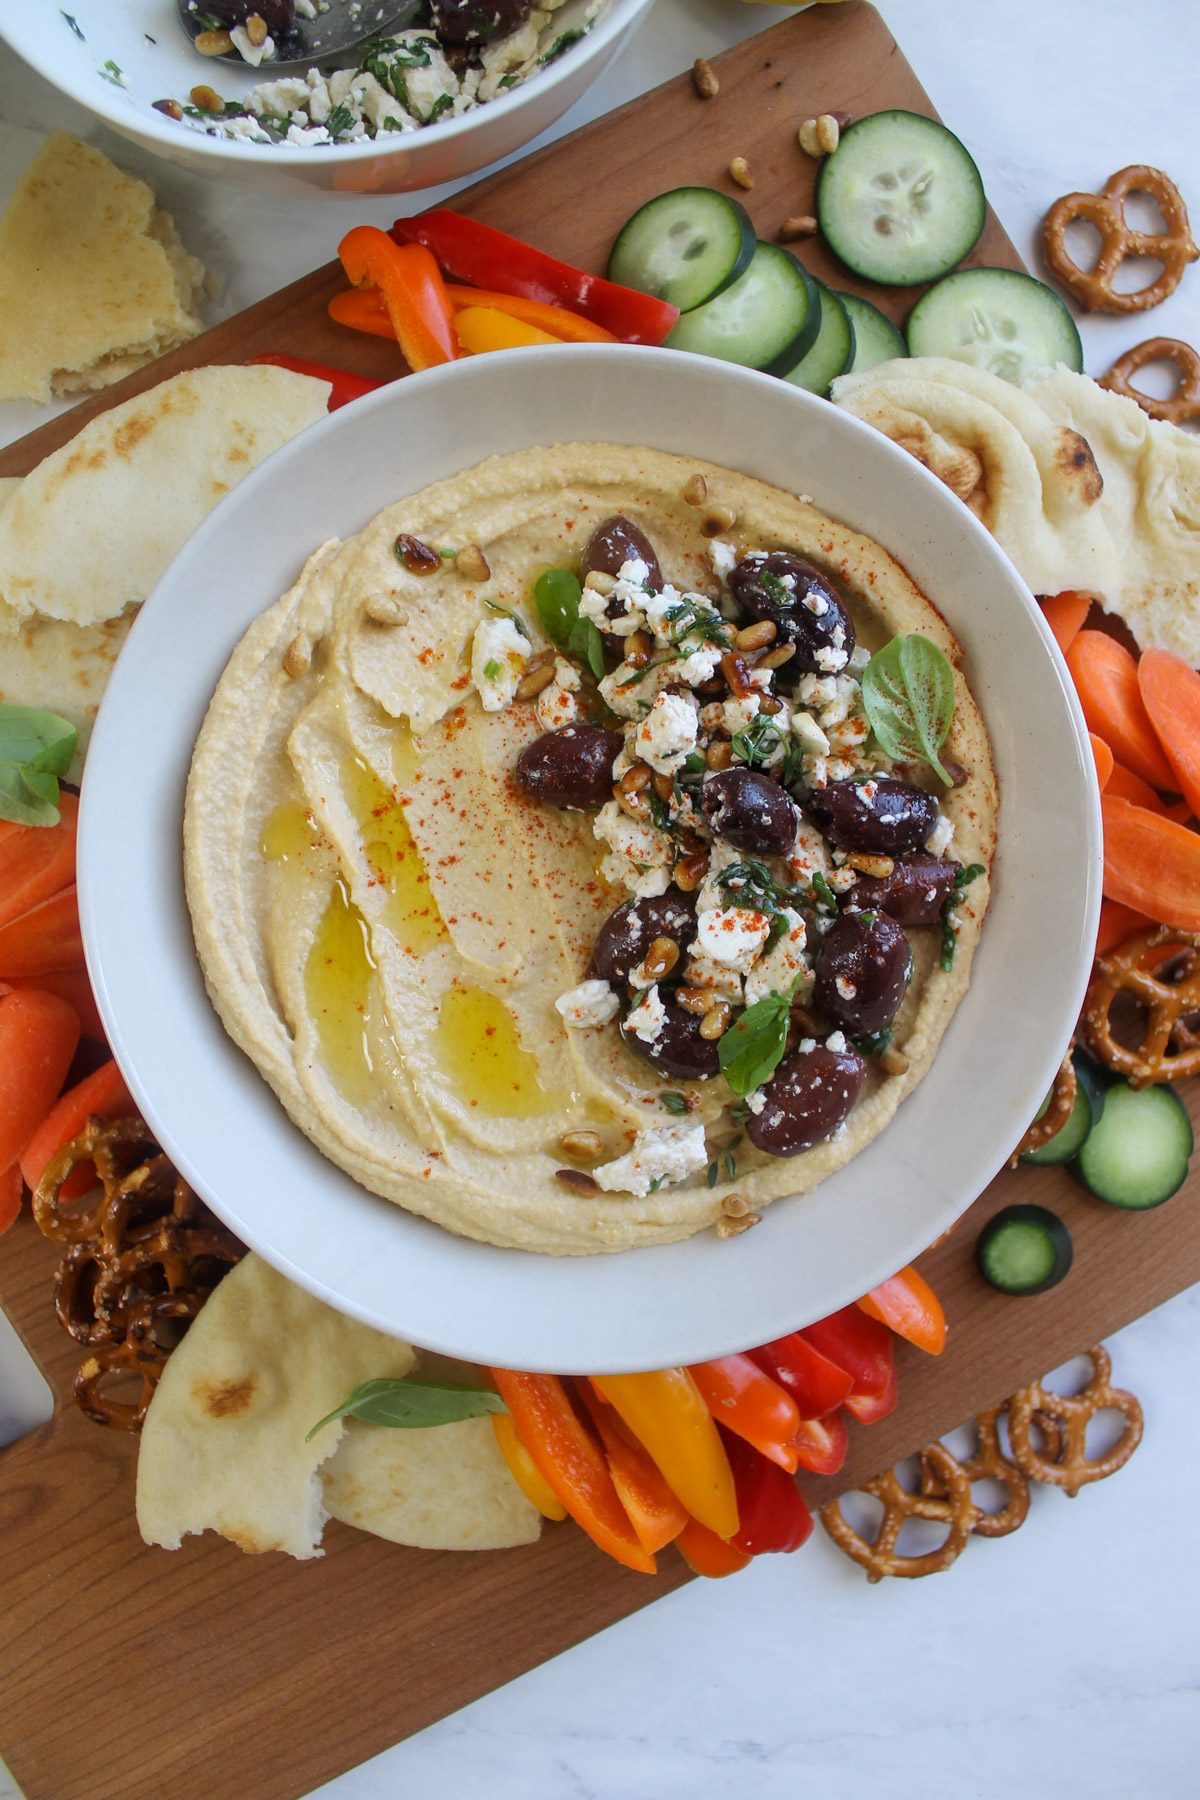 Homemade hummus in a bowl with pita, carrots, bell pepper, cucumbers, and pretzels to dip.